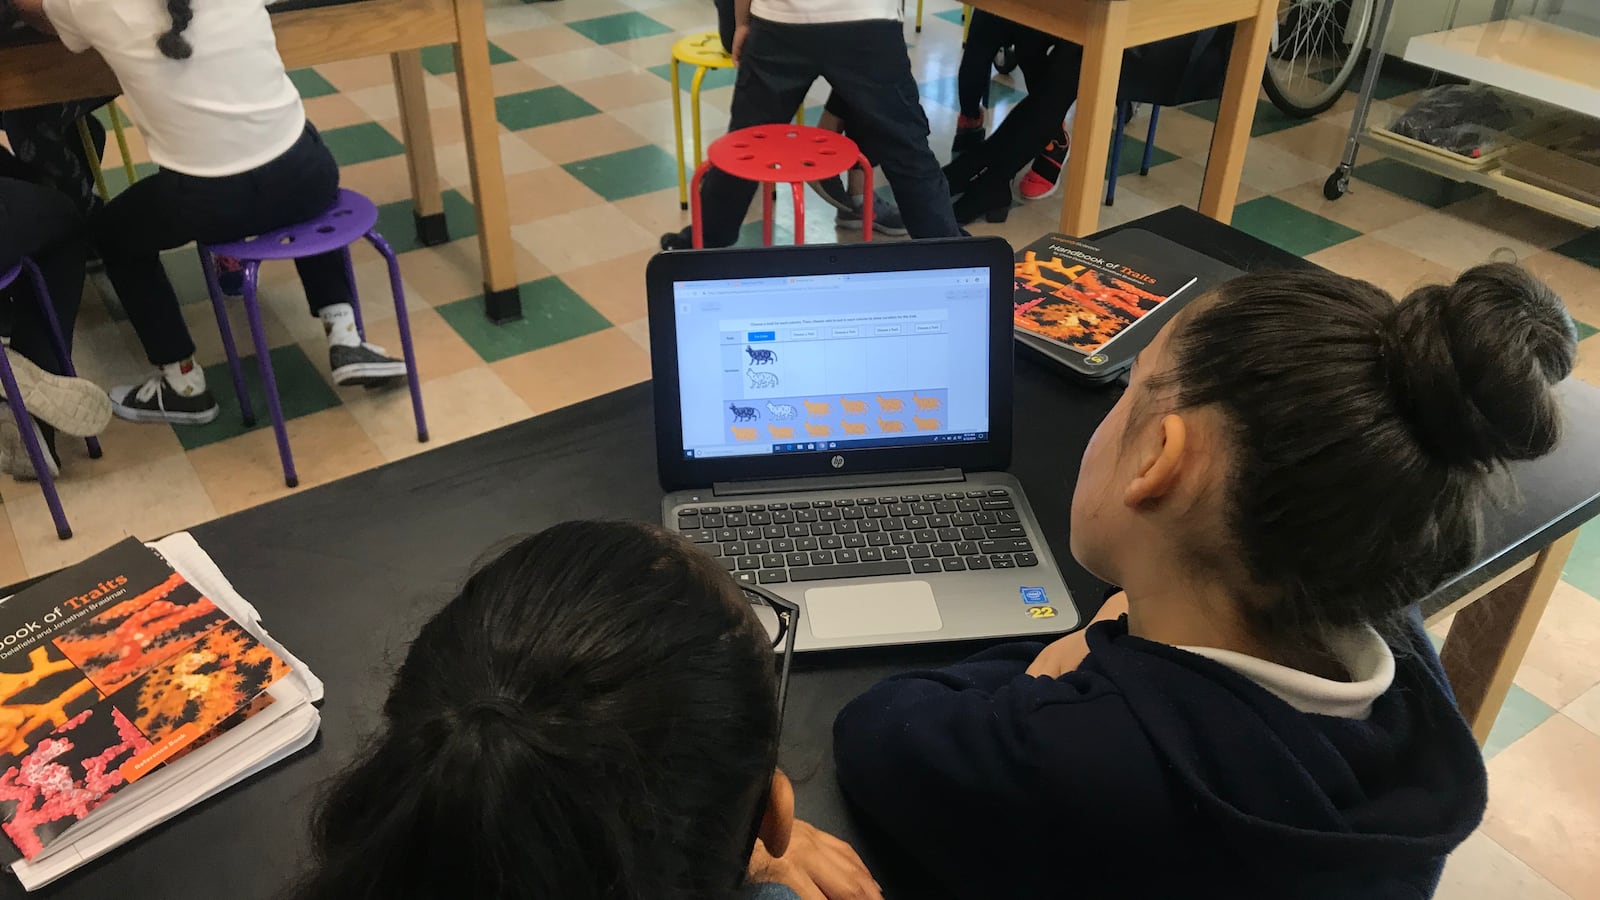 Students at a Bushwick elementary school learn about genes and traits using an interactive simulation through Amplify Science.